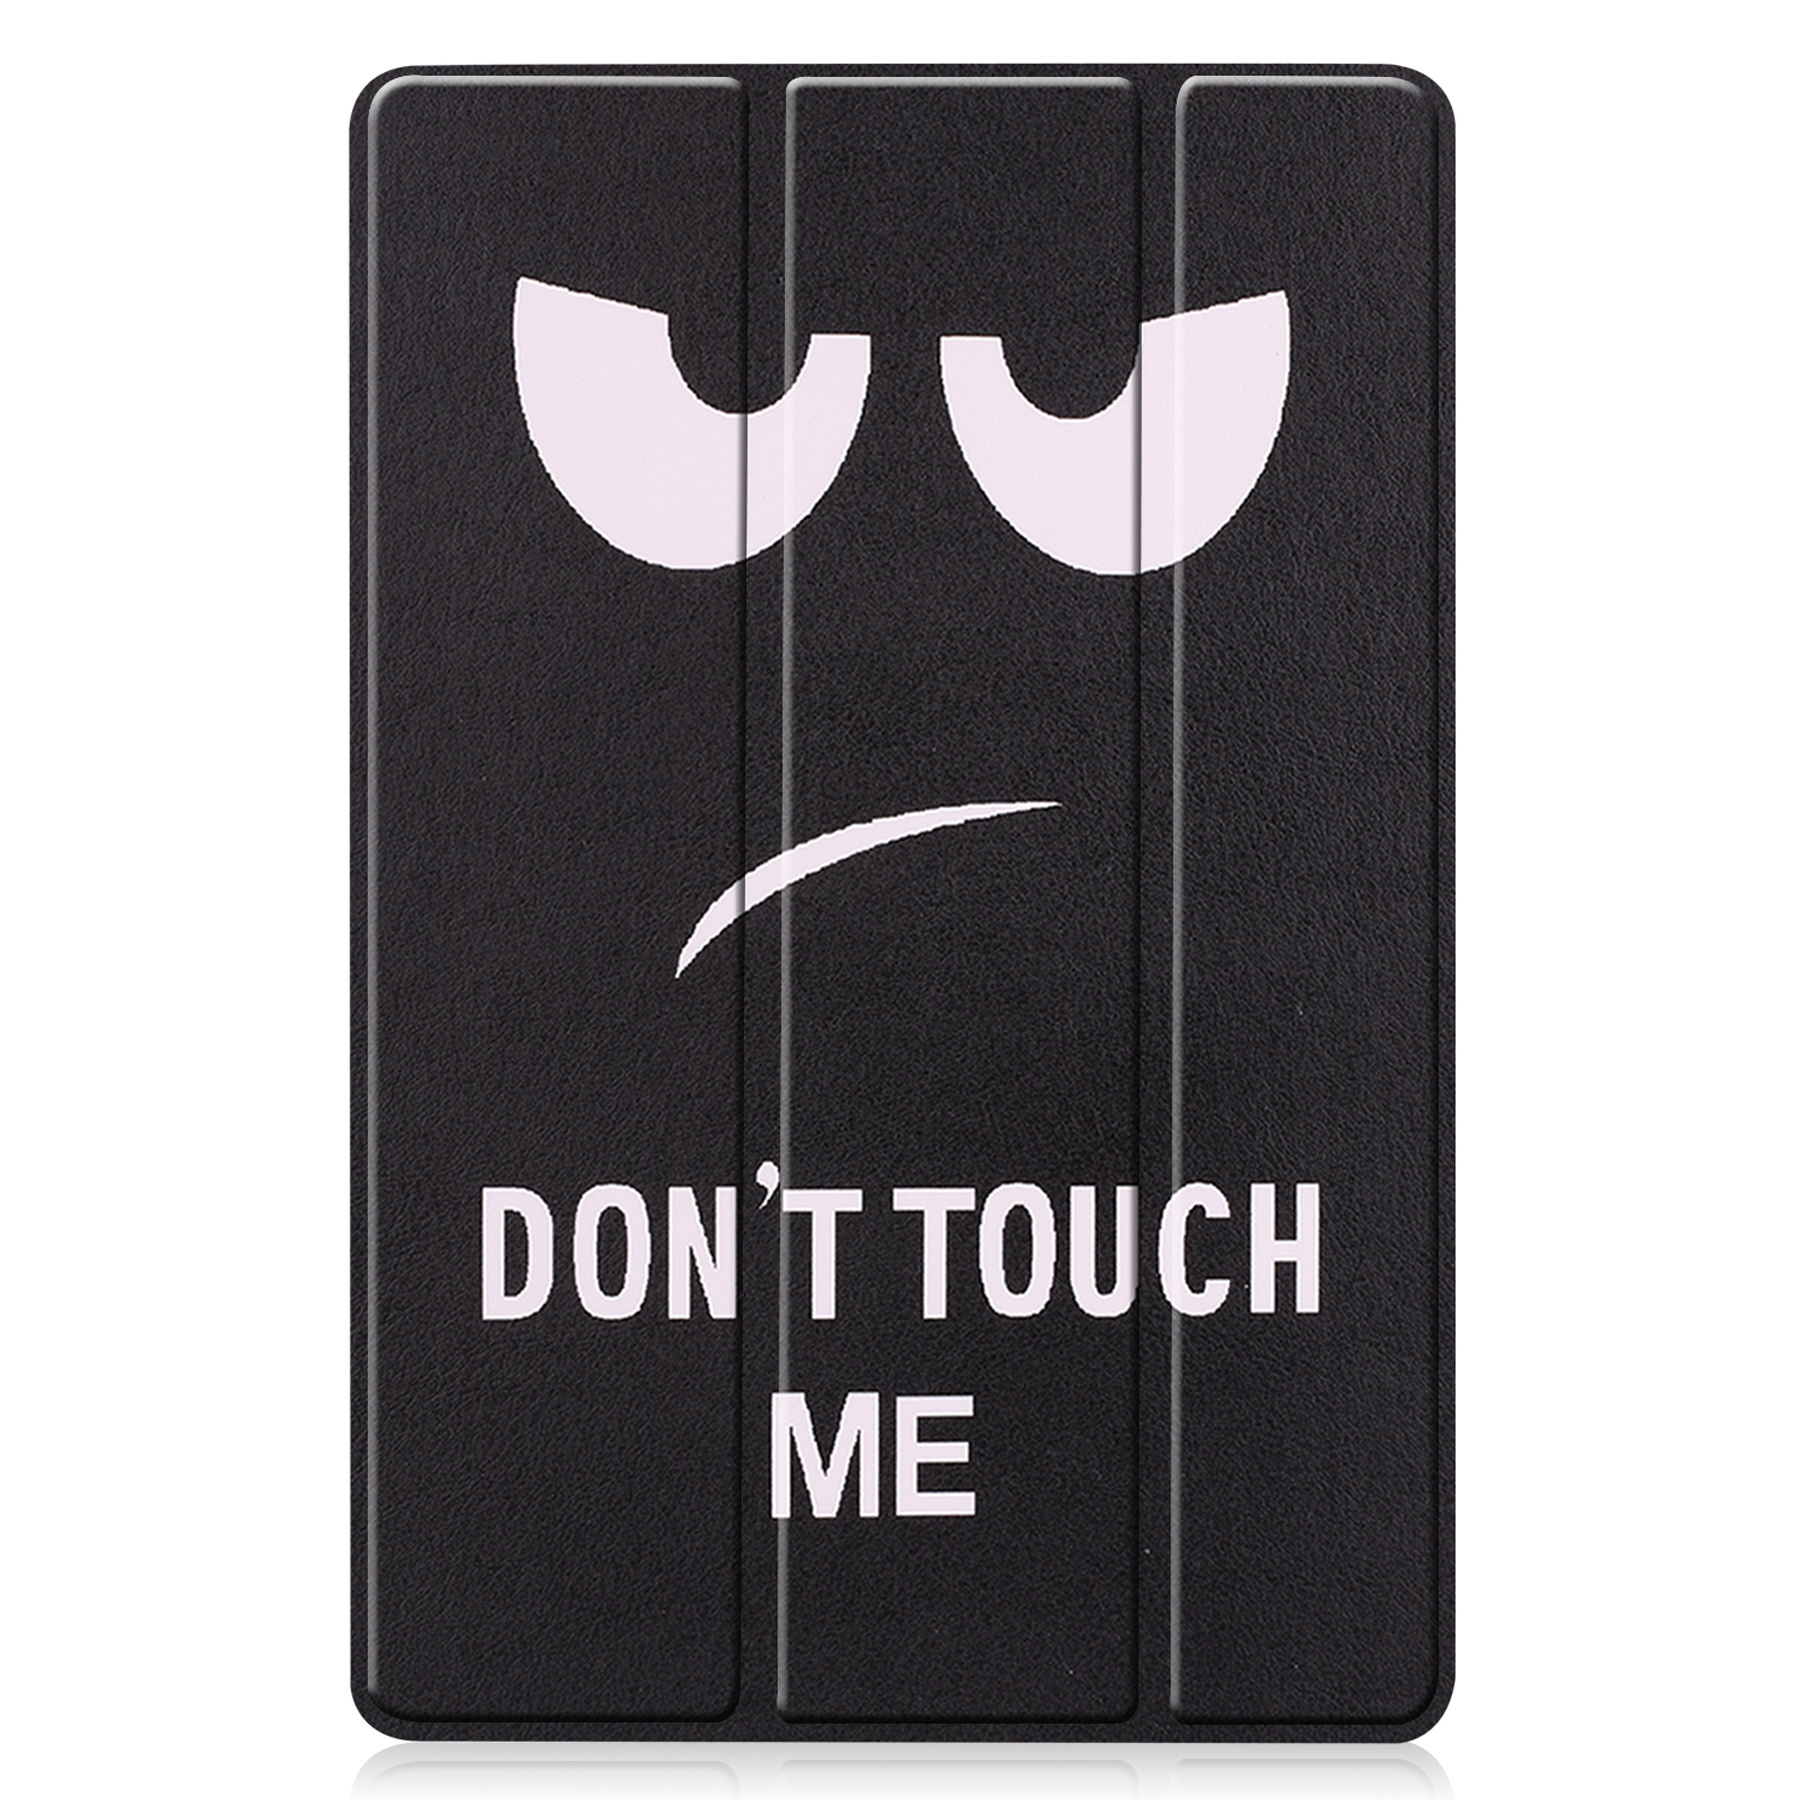 Hoesje Geschikt voor Samsung Galaxy Tab S8 Plus Hoes Case Tablet Hoesje Tri-fold Met Screenprotector - Hoes Geschikt voor Samsung Tab S8 Plus Hoesje Hard Cover Bookcase Hoes - Don't Touch Me